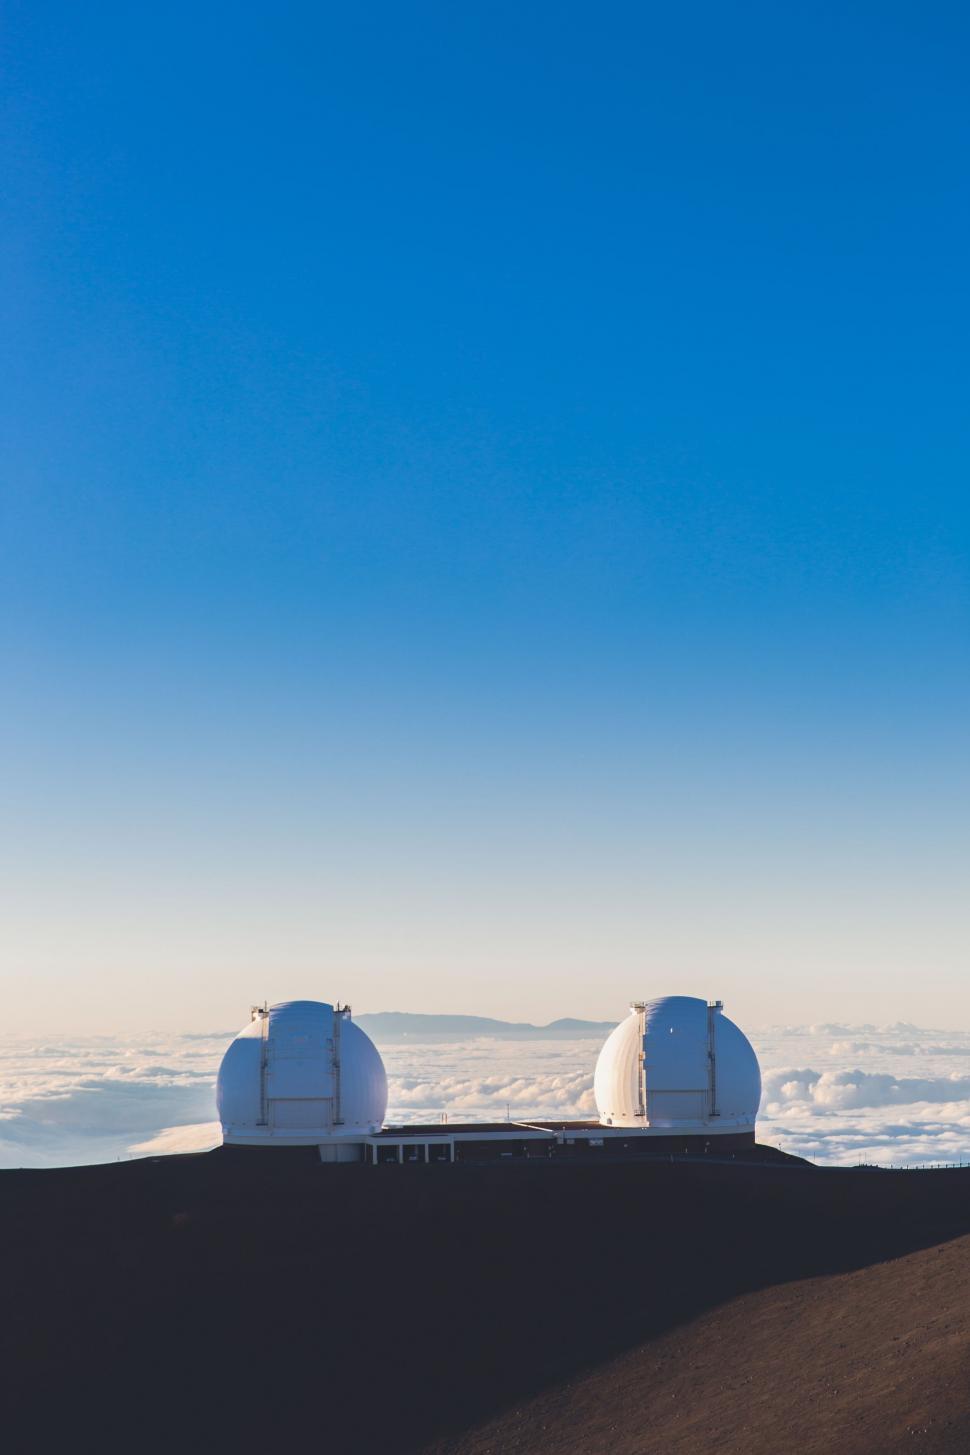 Free Image of Observatory domes against blue sky 